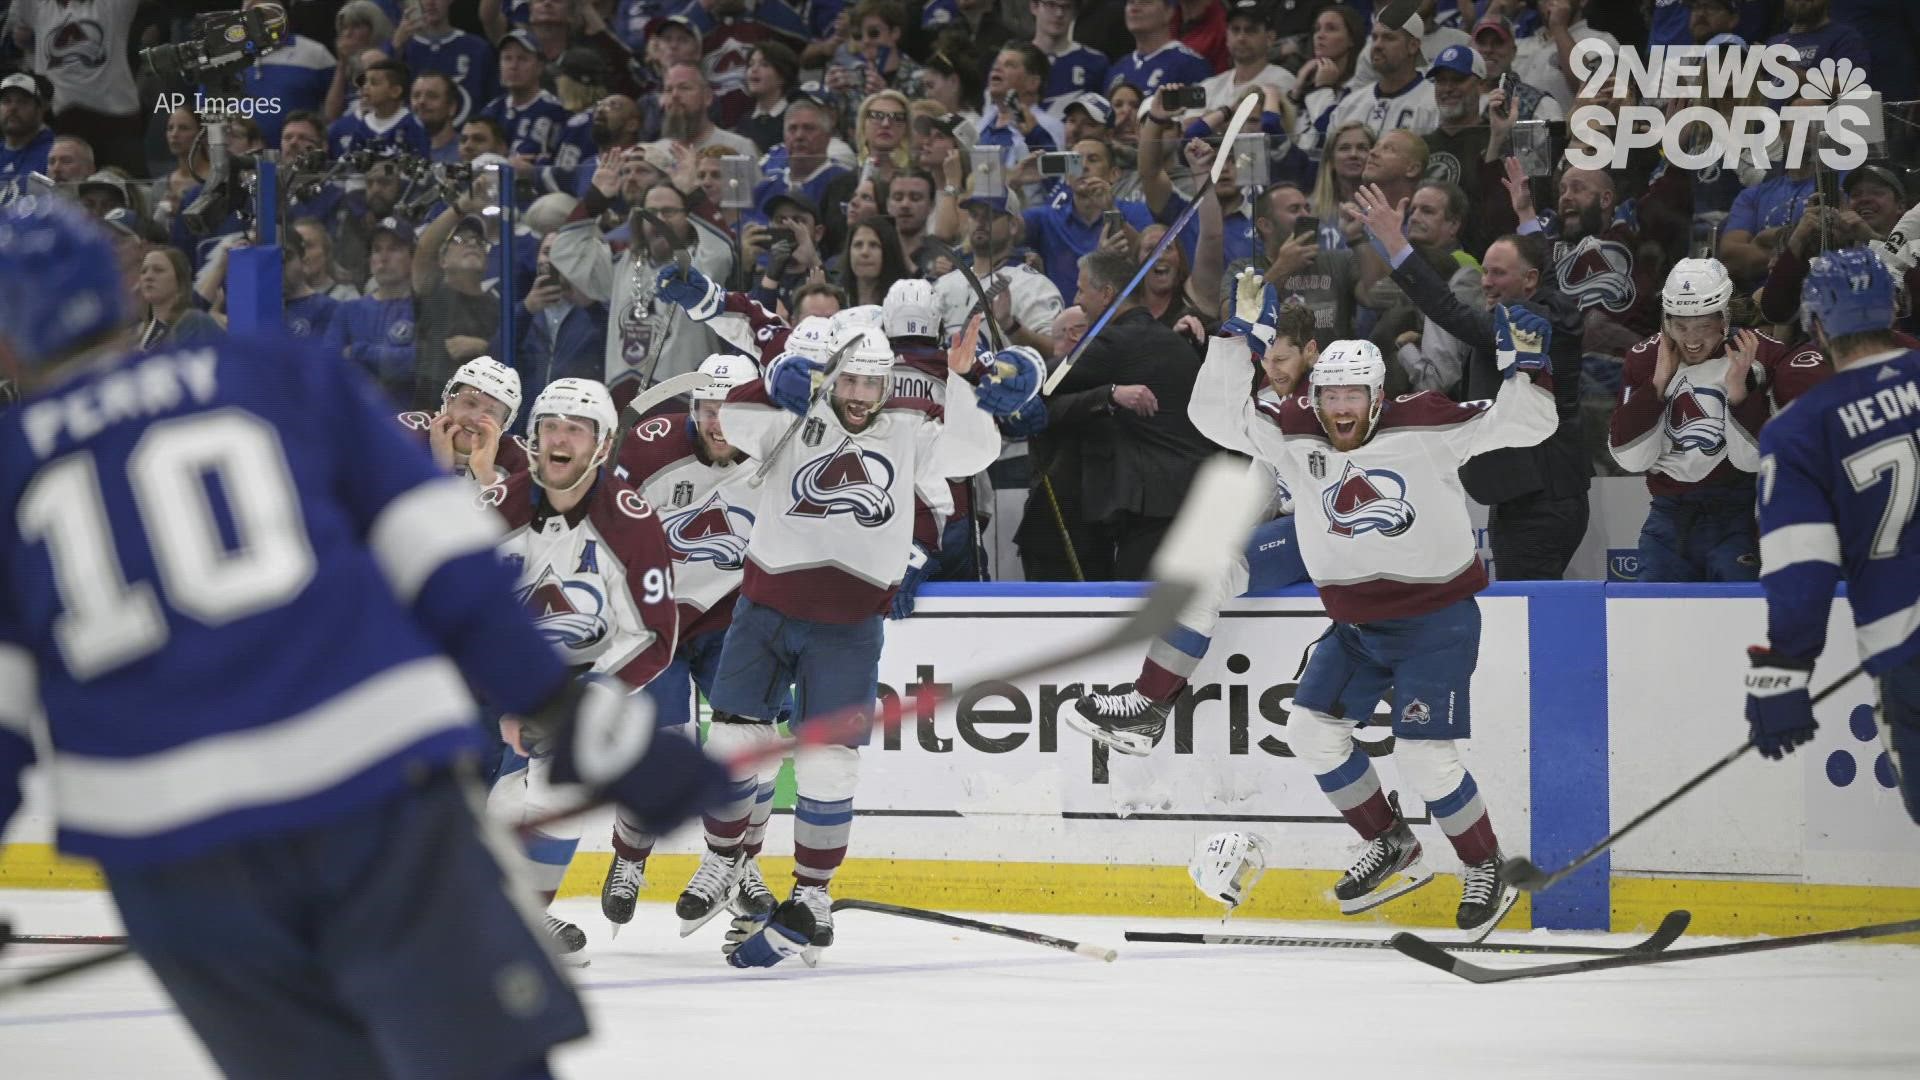 The Colorado Avalanche team has been nonstop partying after winning the Stanley Cup. The Cup has made cameos all around Denver throughout the week.